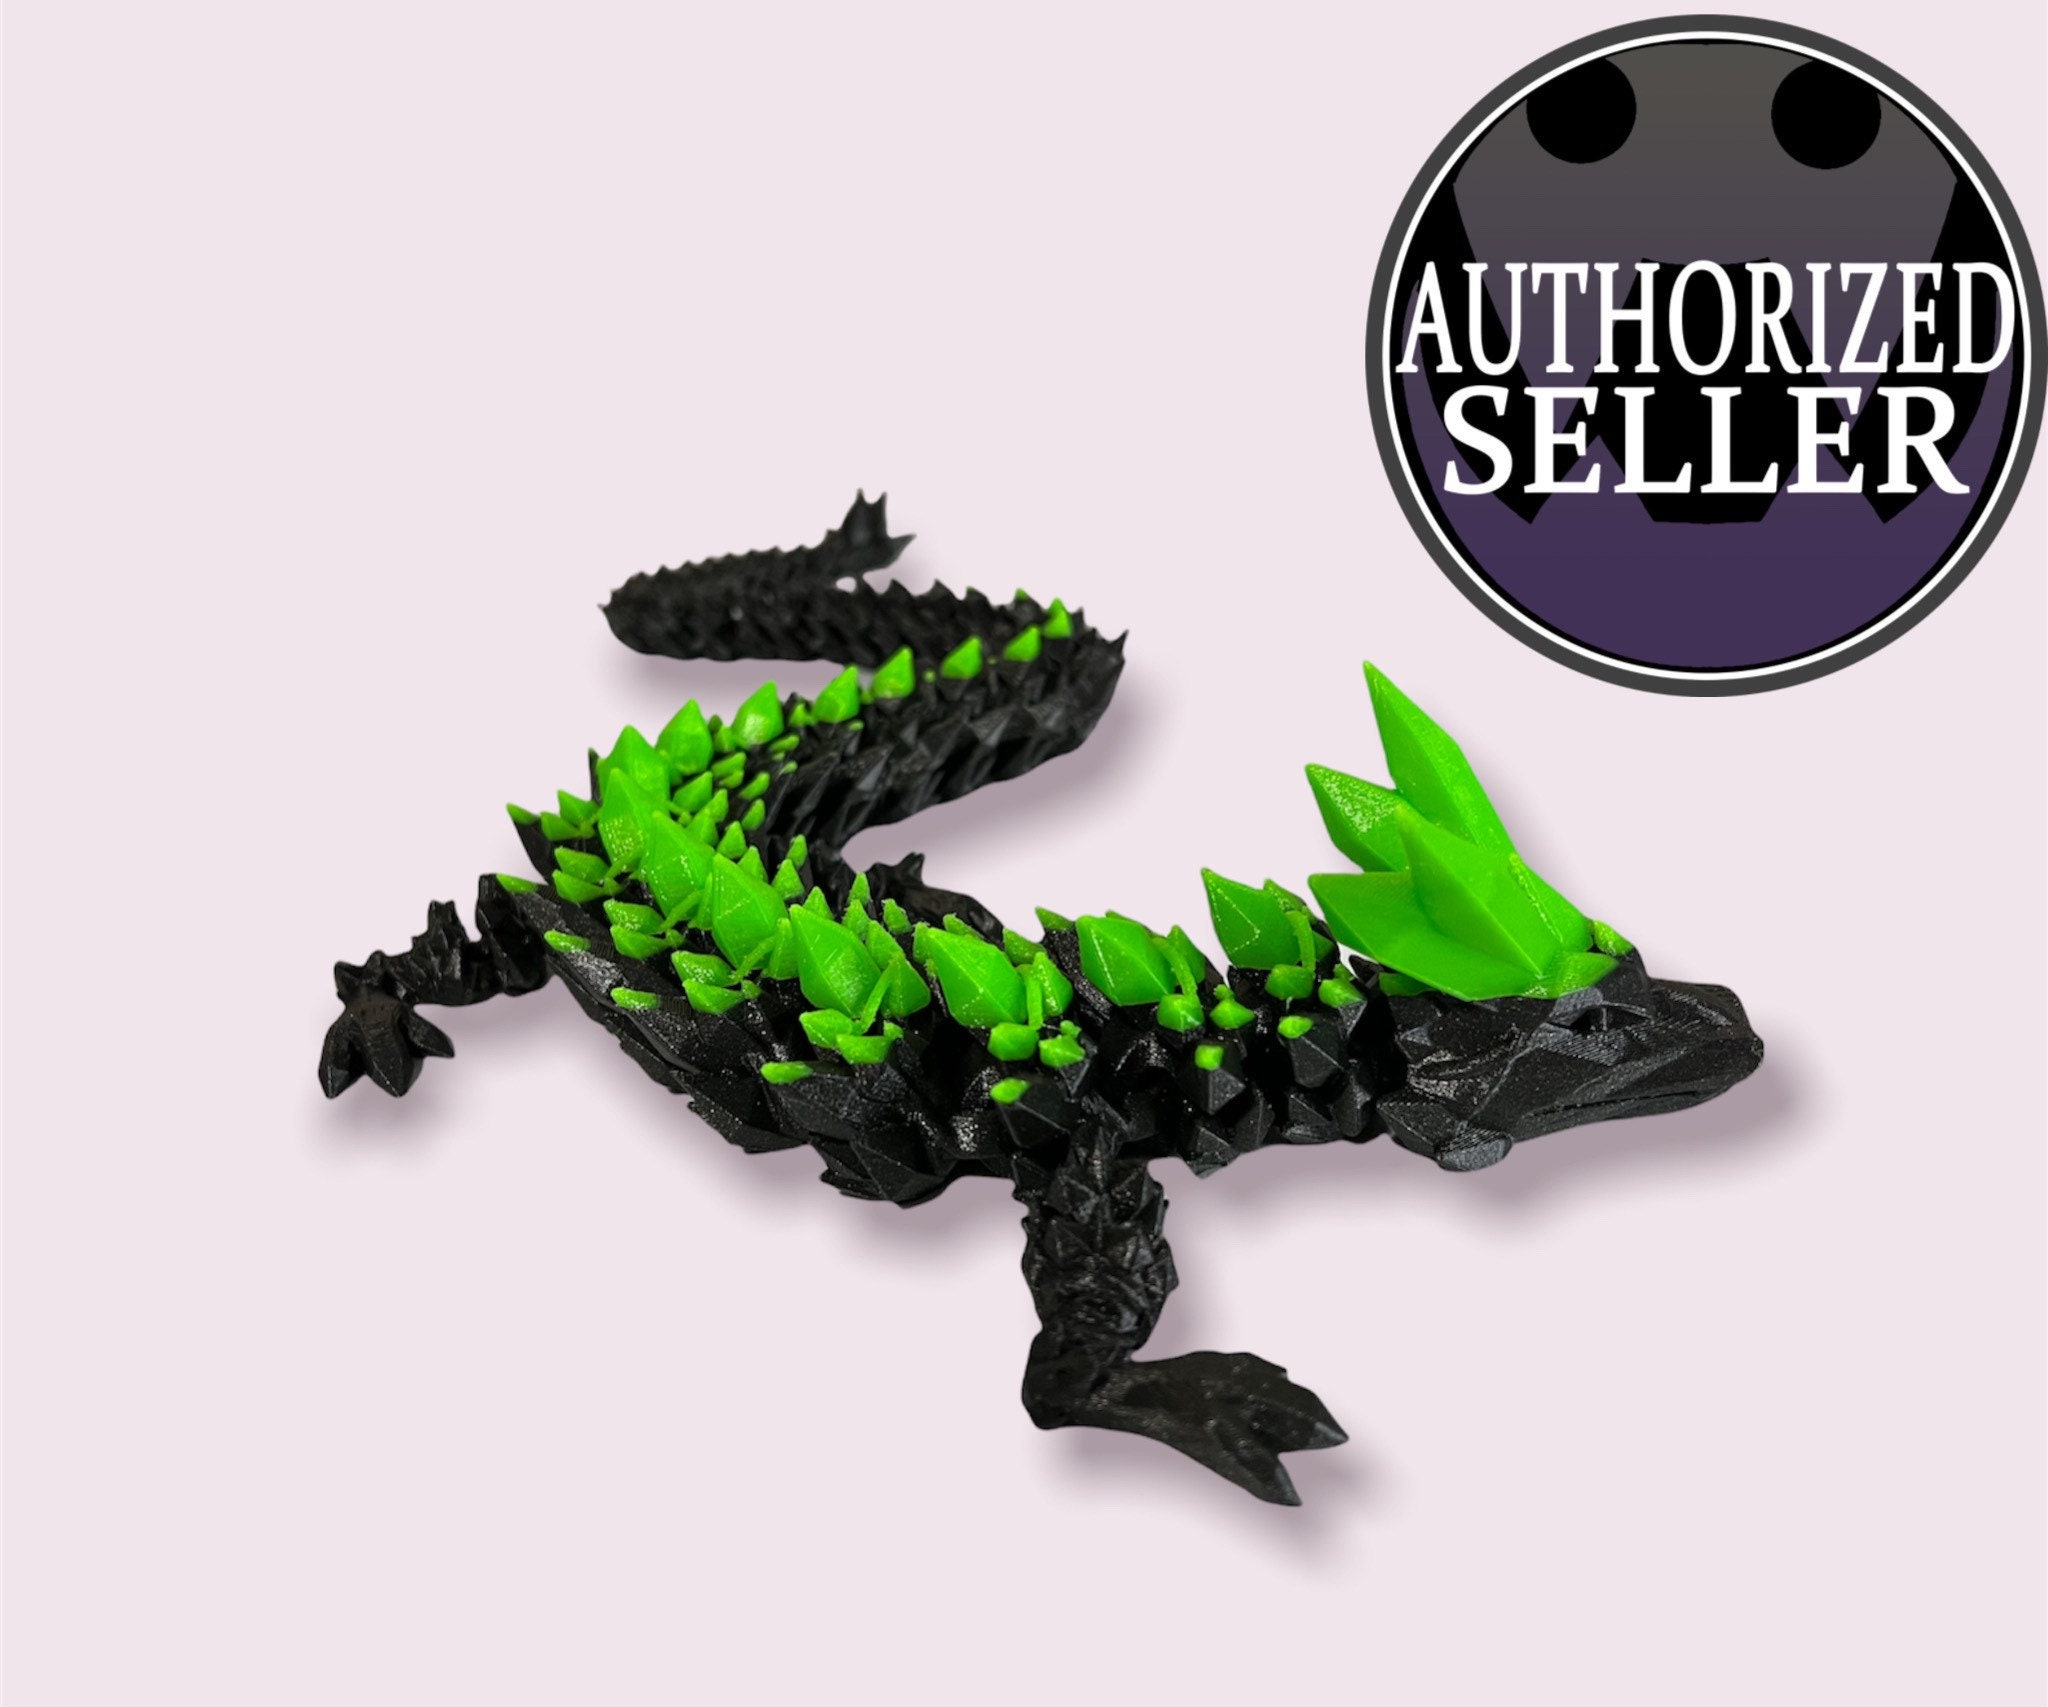 3D Printed Dragon Flying Snake Animal Figurines Home Decor with Flexible  Movable Joints, Sturdy Durable Ancient Mythical Beast Monster Action  Figures